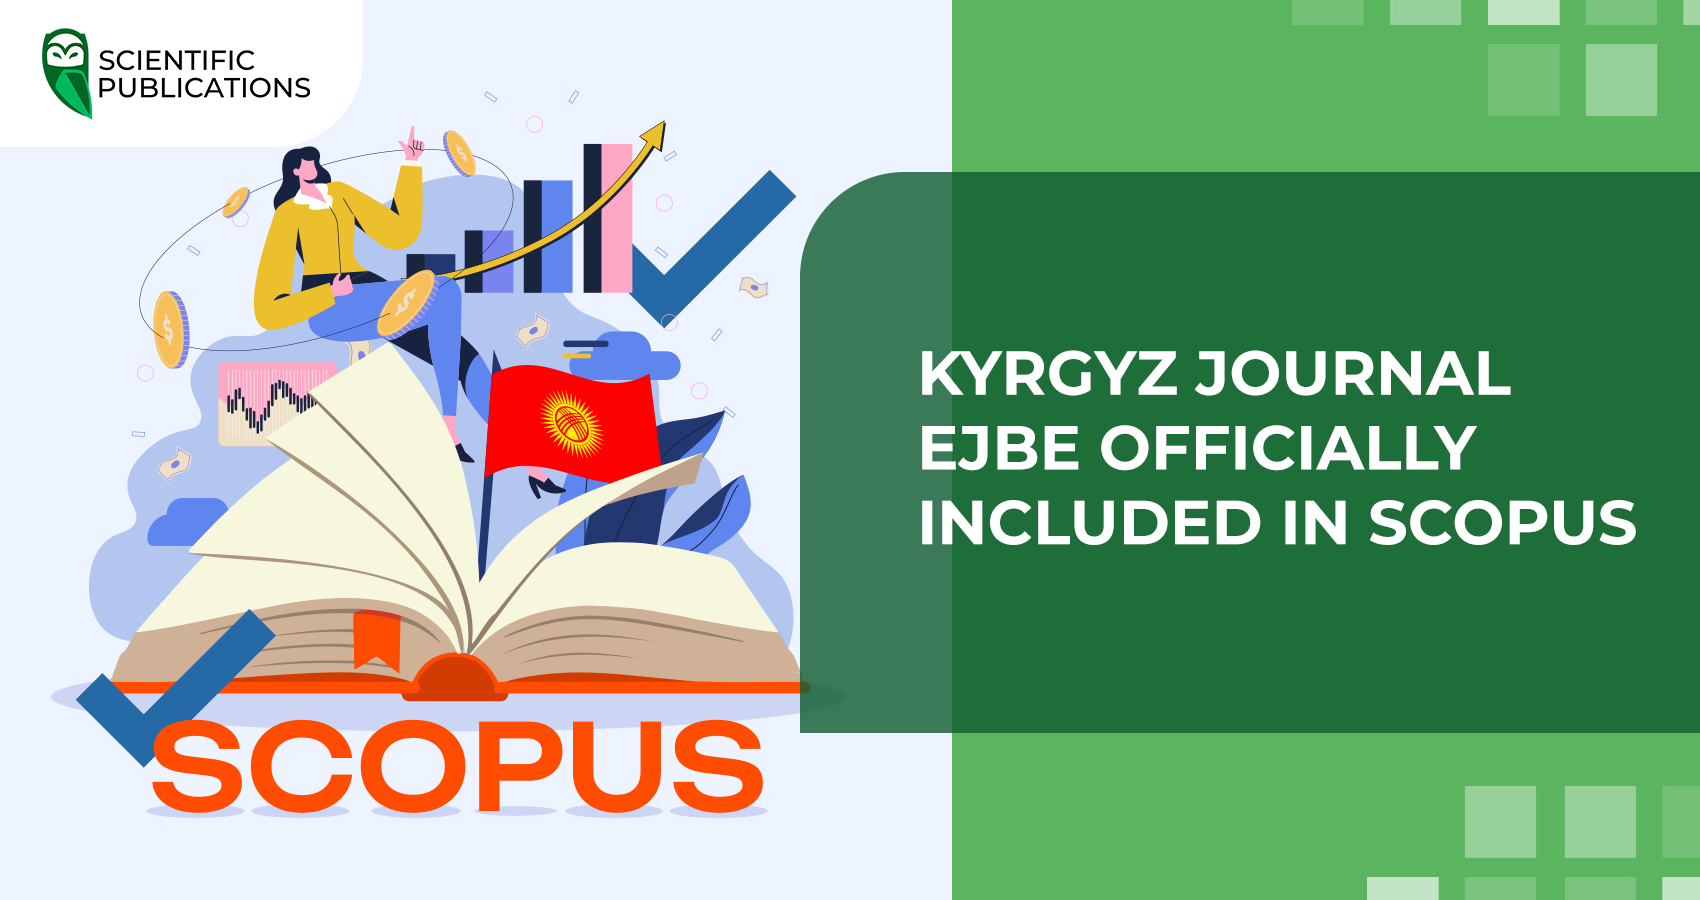 Kyrgyz journal Eurasian Journal of Business and Economics (EJBE) officially included in Scopus